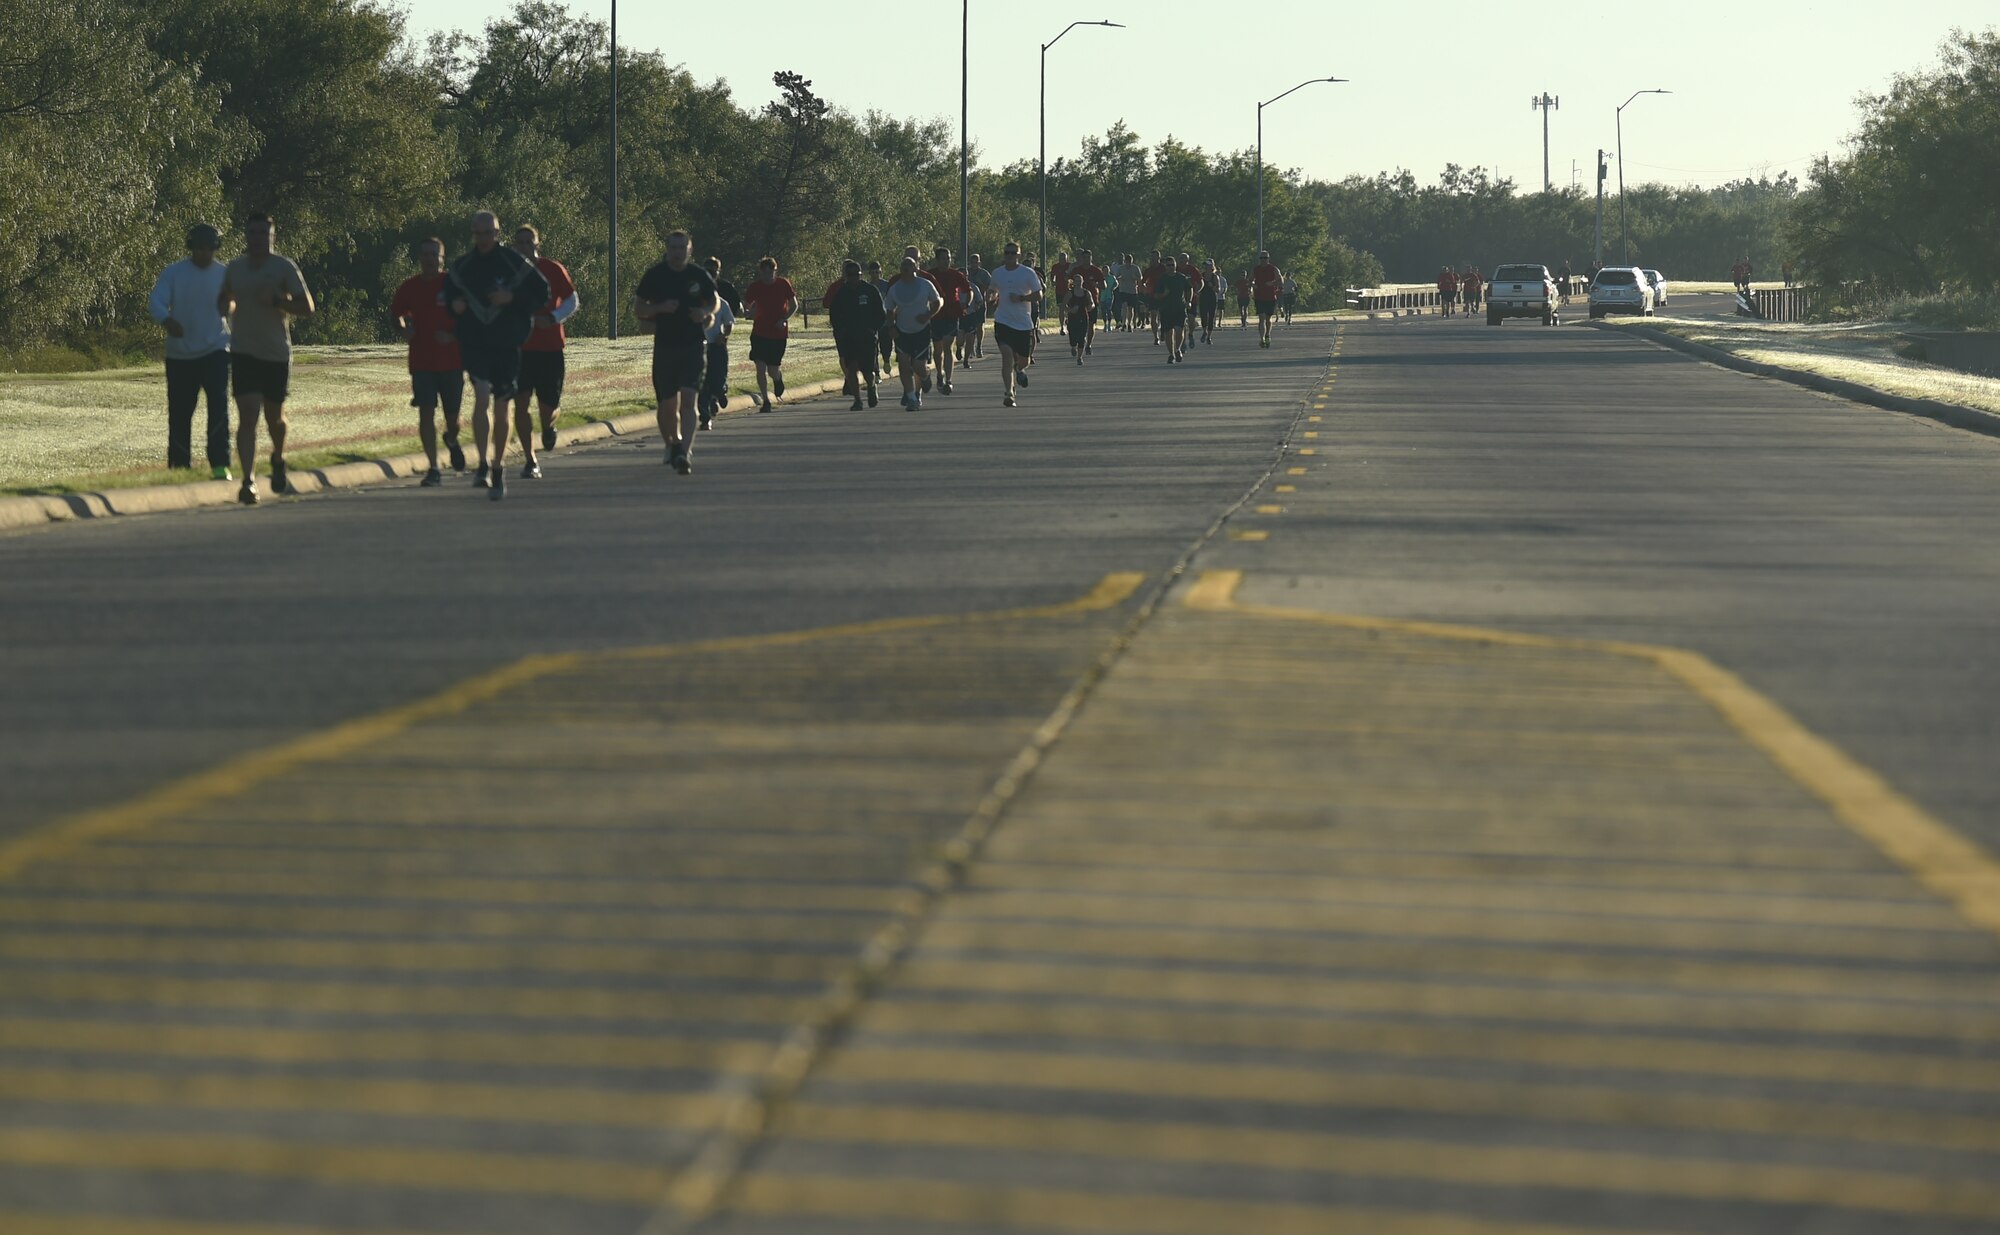 Airmen, families and members of the Abilene community run down a road at Dyess Air Force Base, Texas, Sept. 30, 2016. The 6.2 mile run was in honor of the members of TORQE 62 who were killed in a C-130J Super Hercules crash in Jalalabad, Afghanistan, Oct. 2, 2015. (U.S. Air Force photo by Airman 1st Class Quay Drawdy)